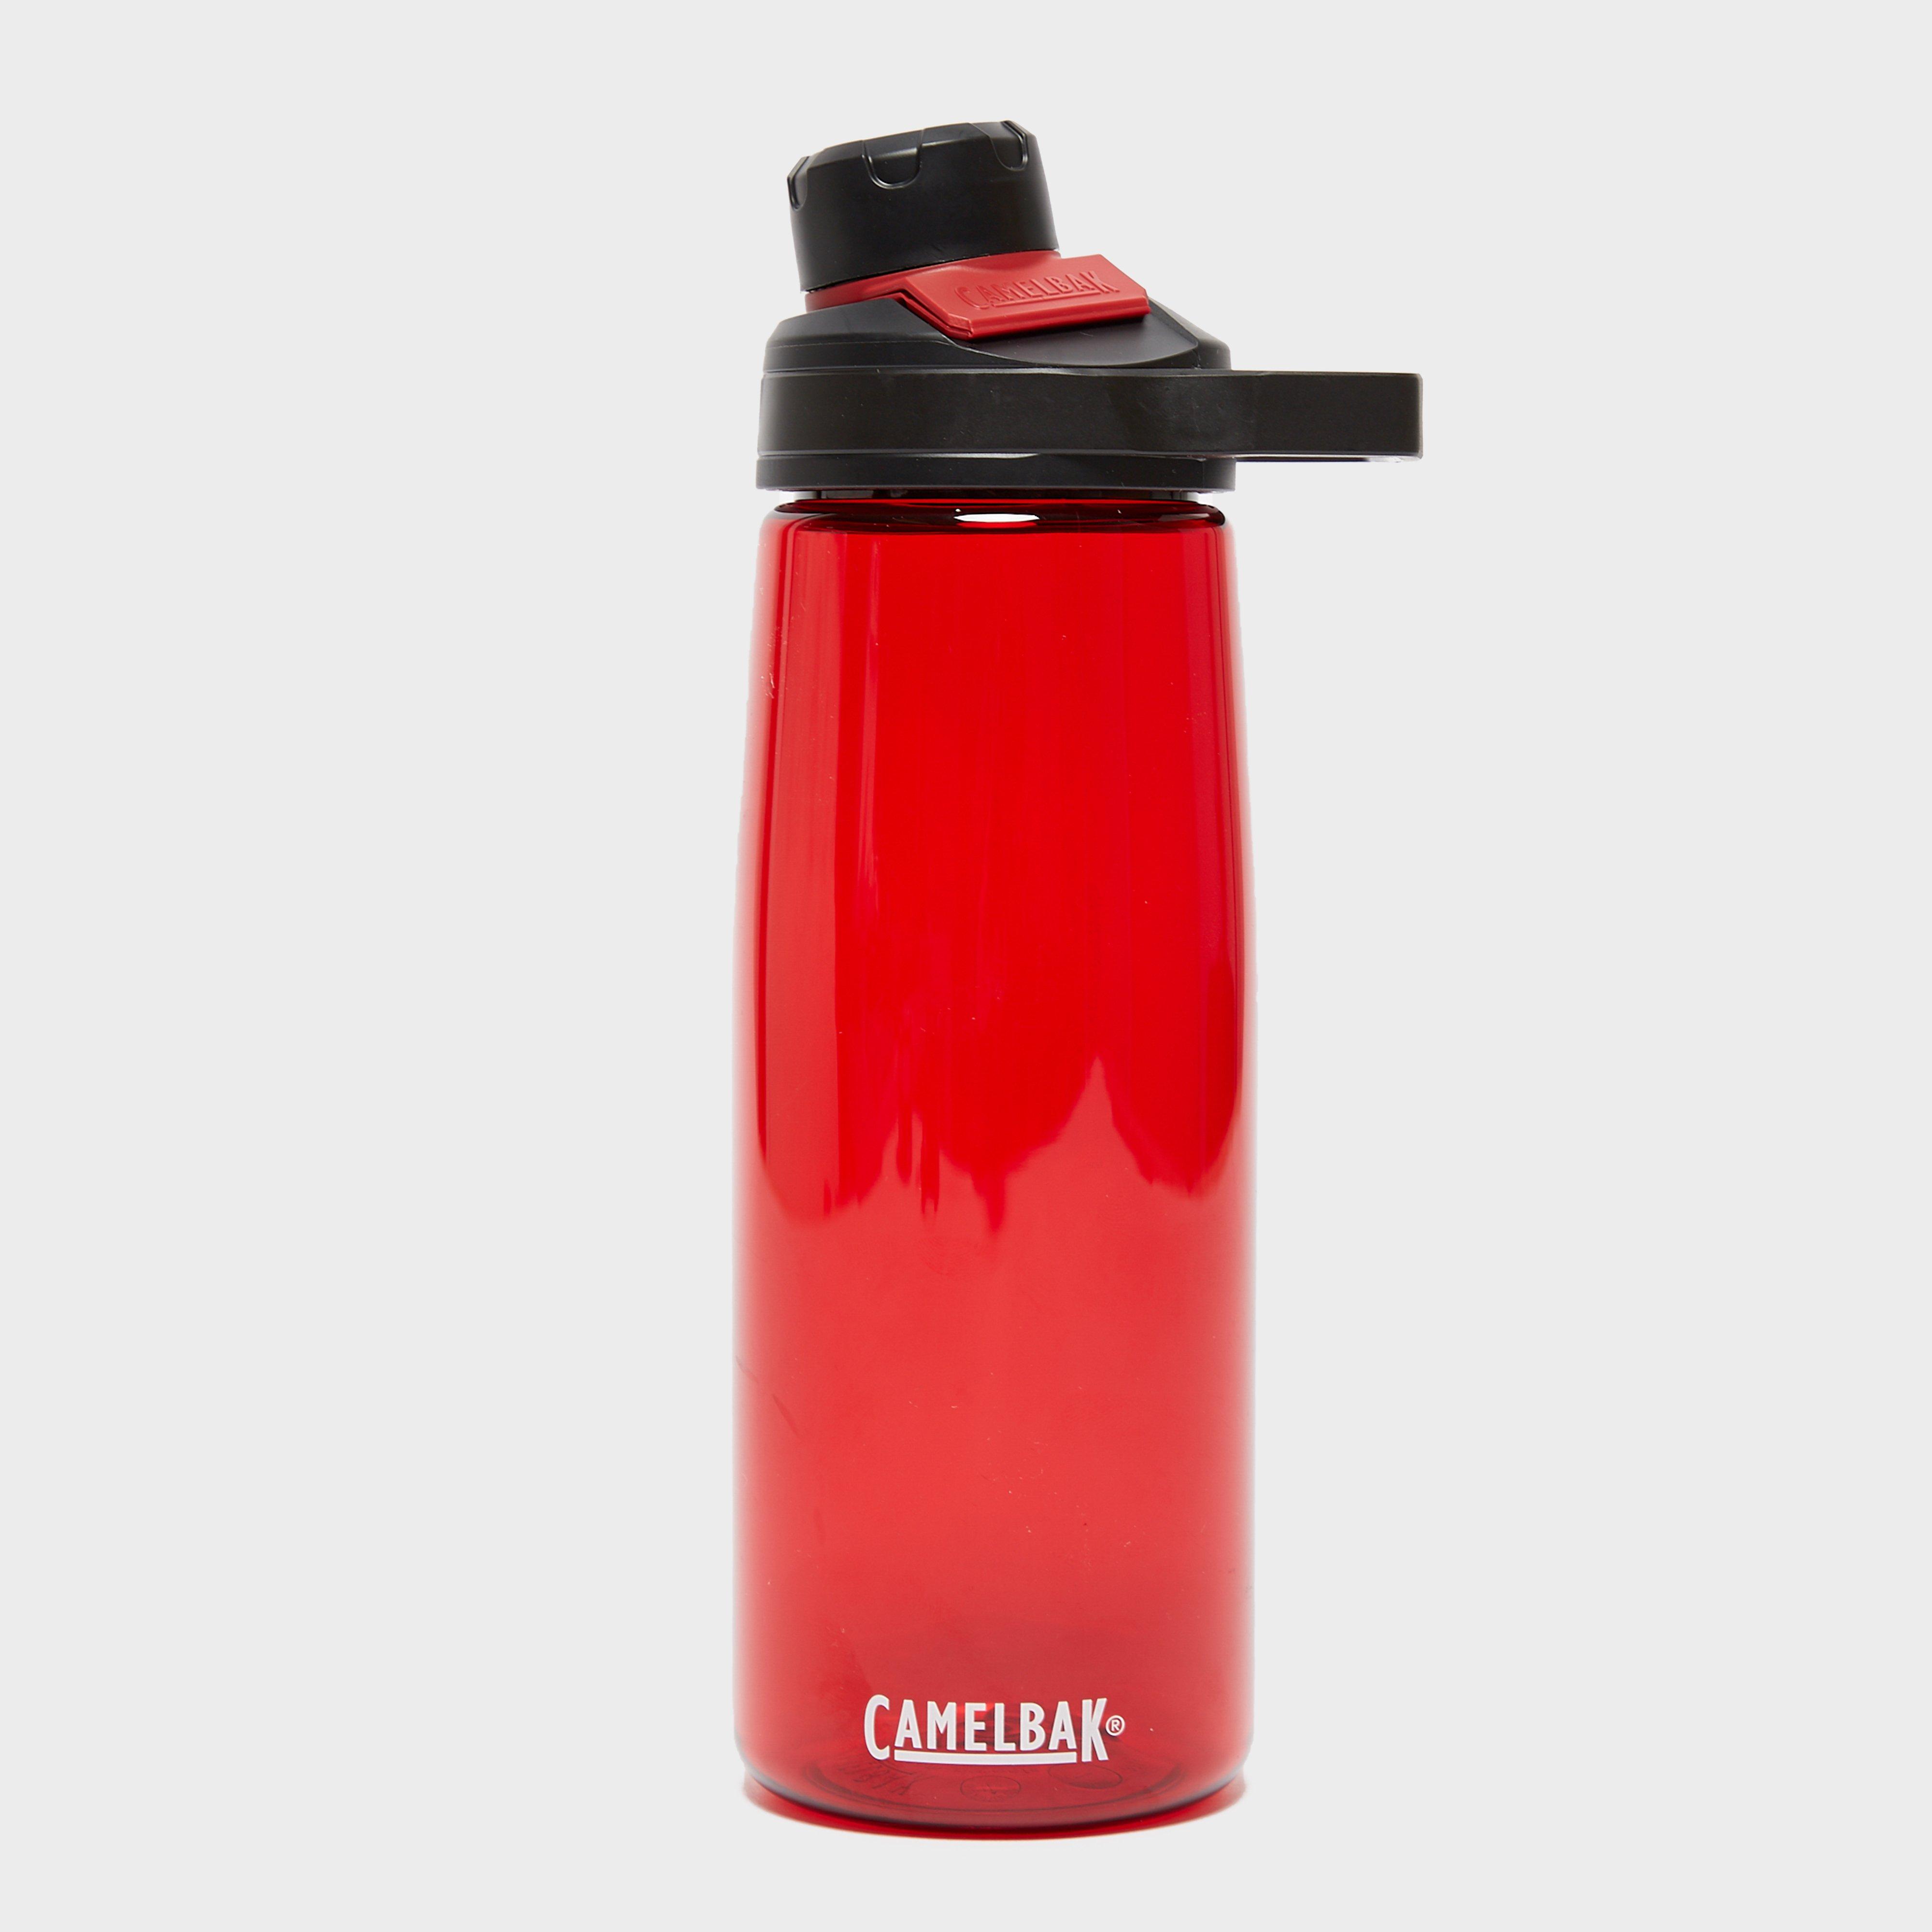 Camelbak Chute Mag 750ml Water Bottle - Red/red  Red/red